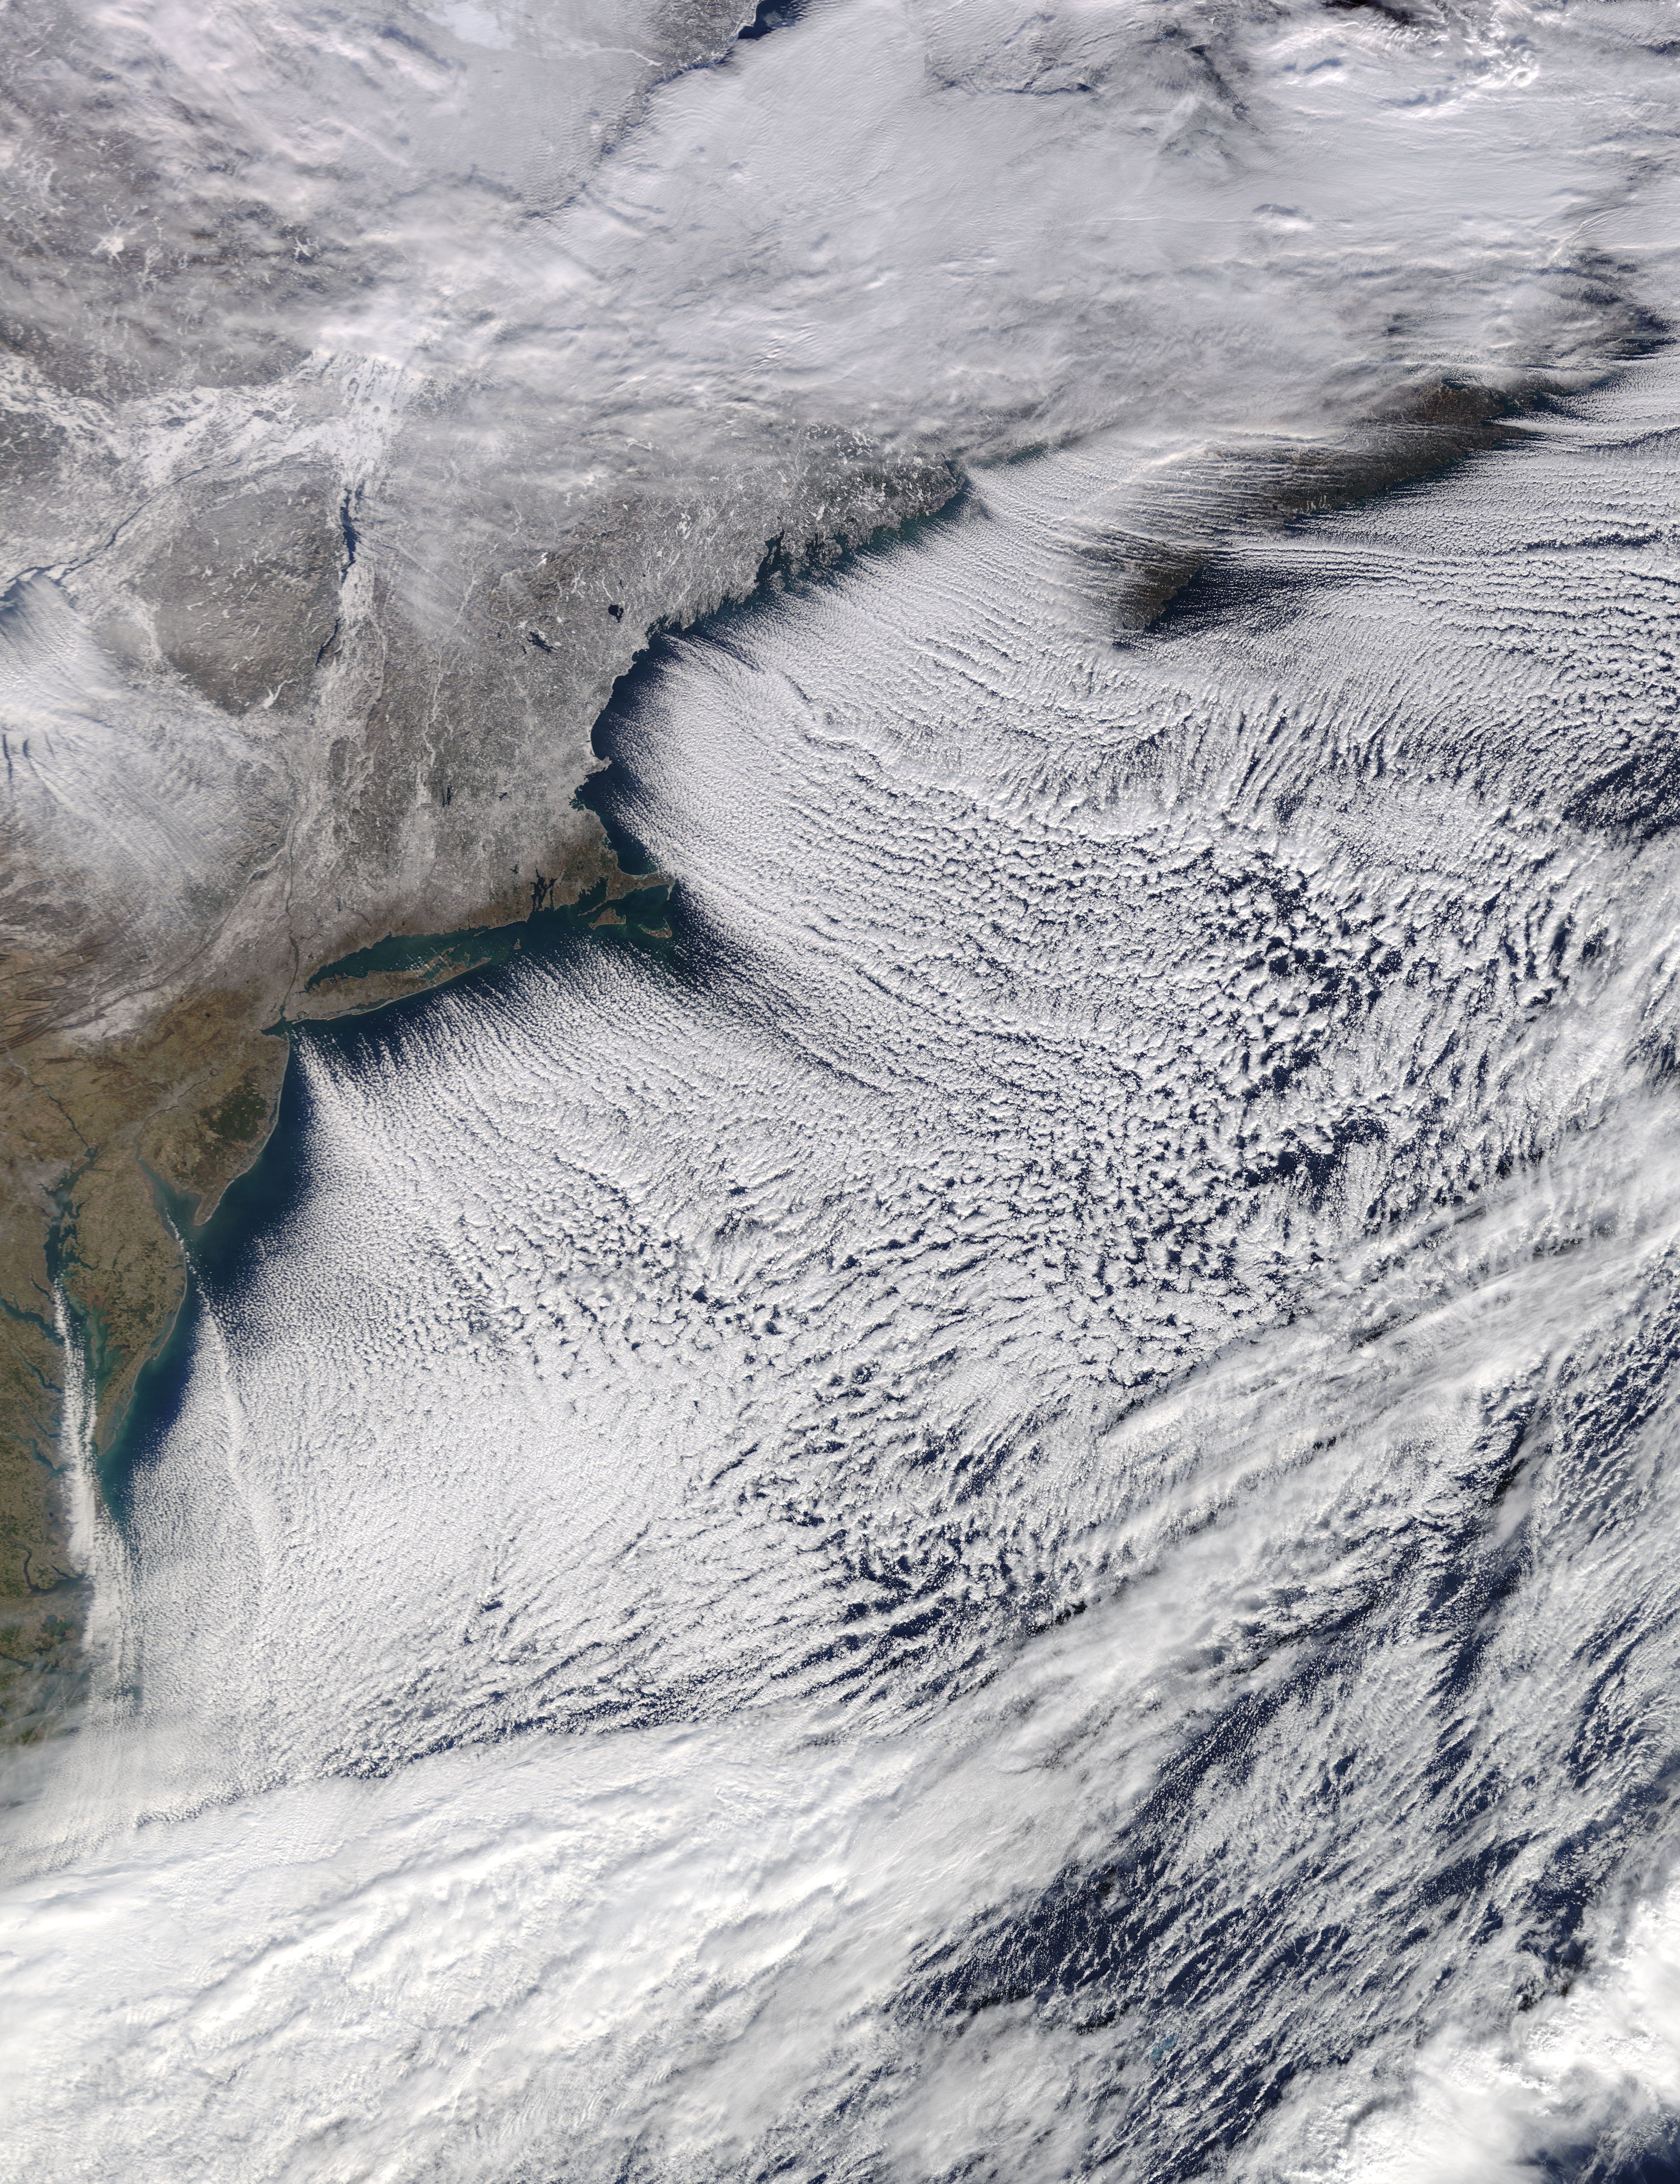 Cloud streets off the northeastern United States - related image preview